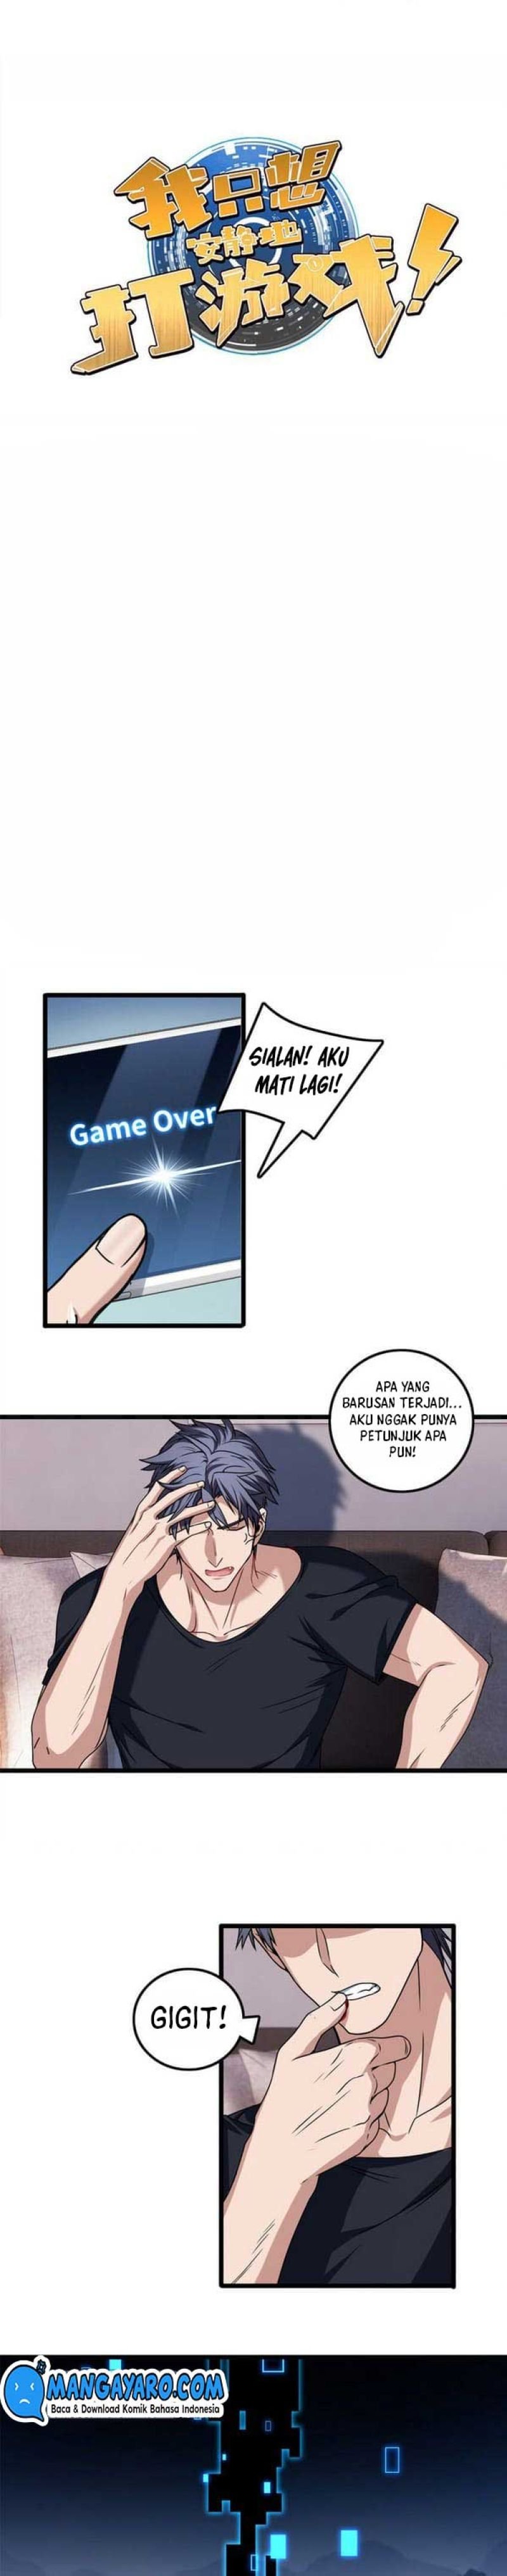 Let Me Game In Peace Chapter 41